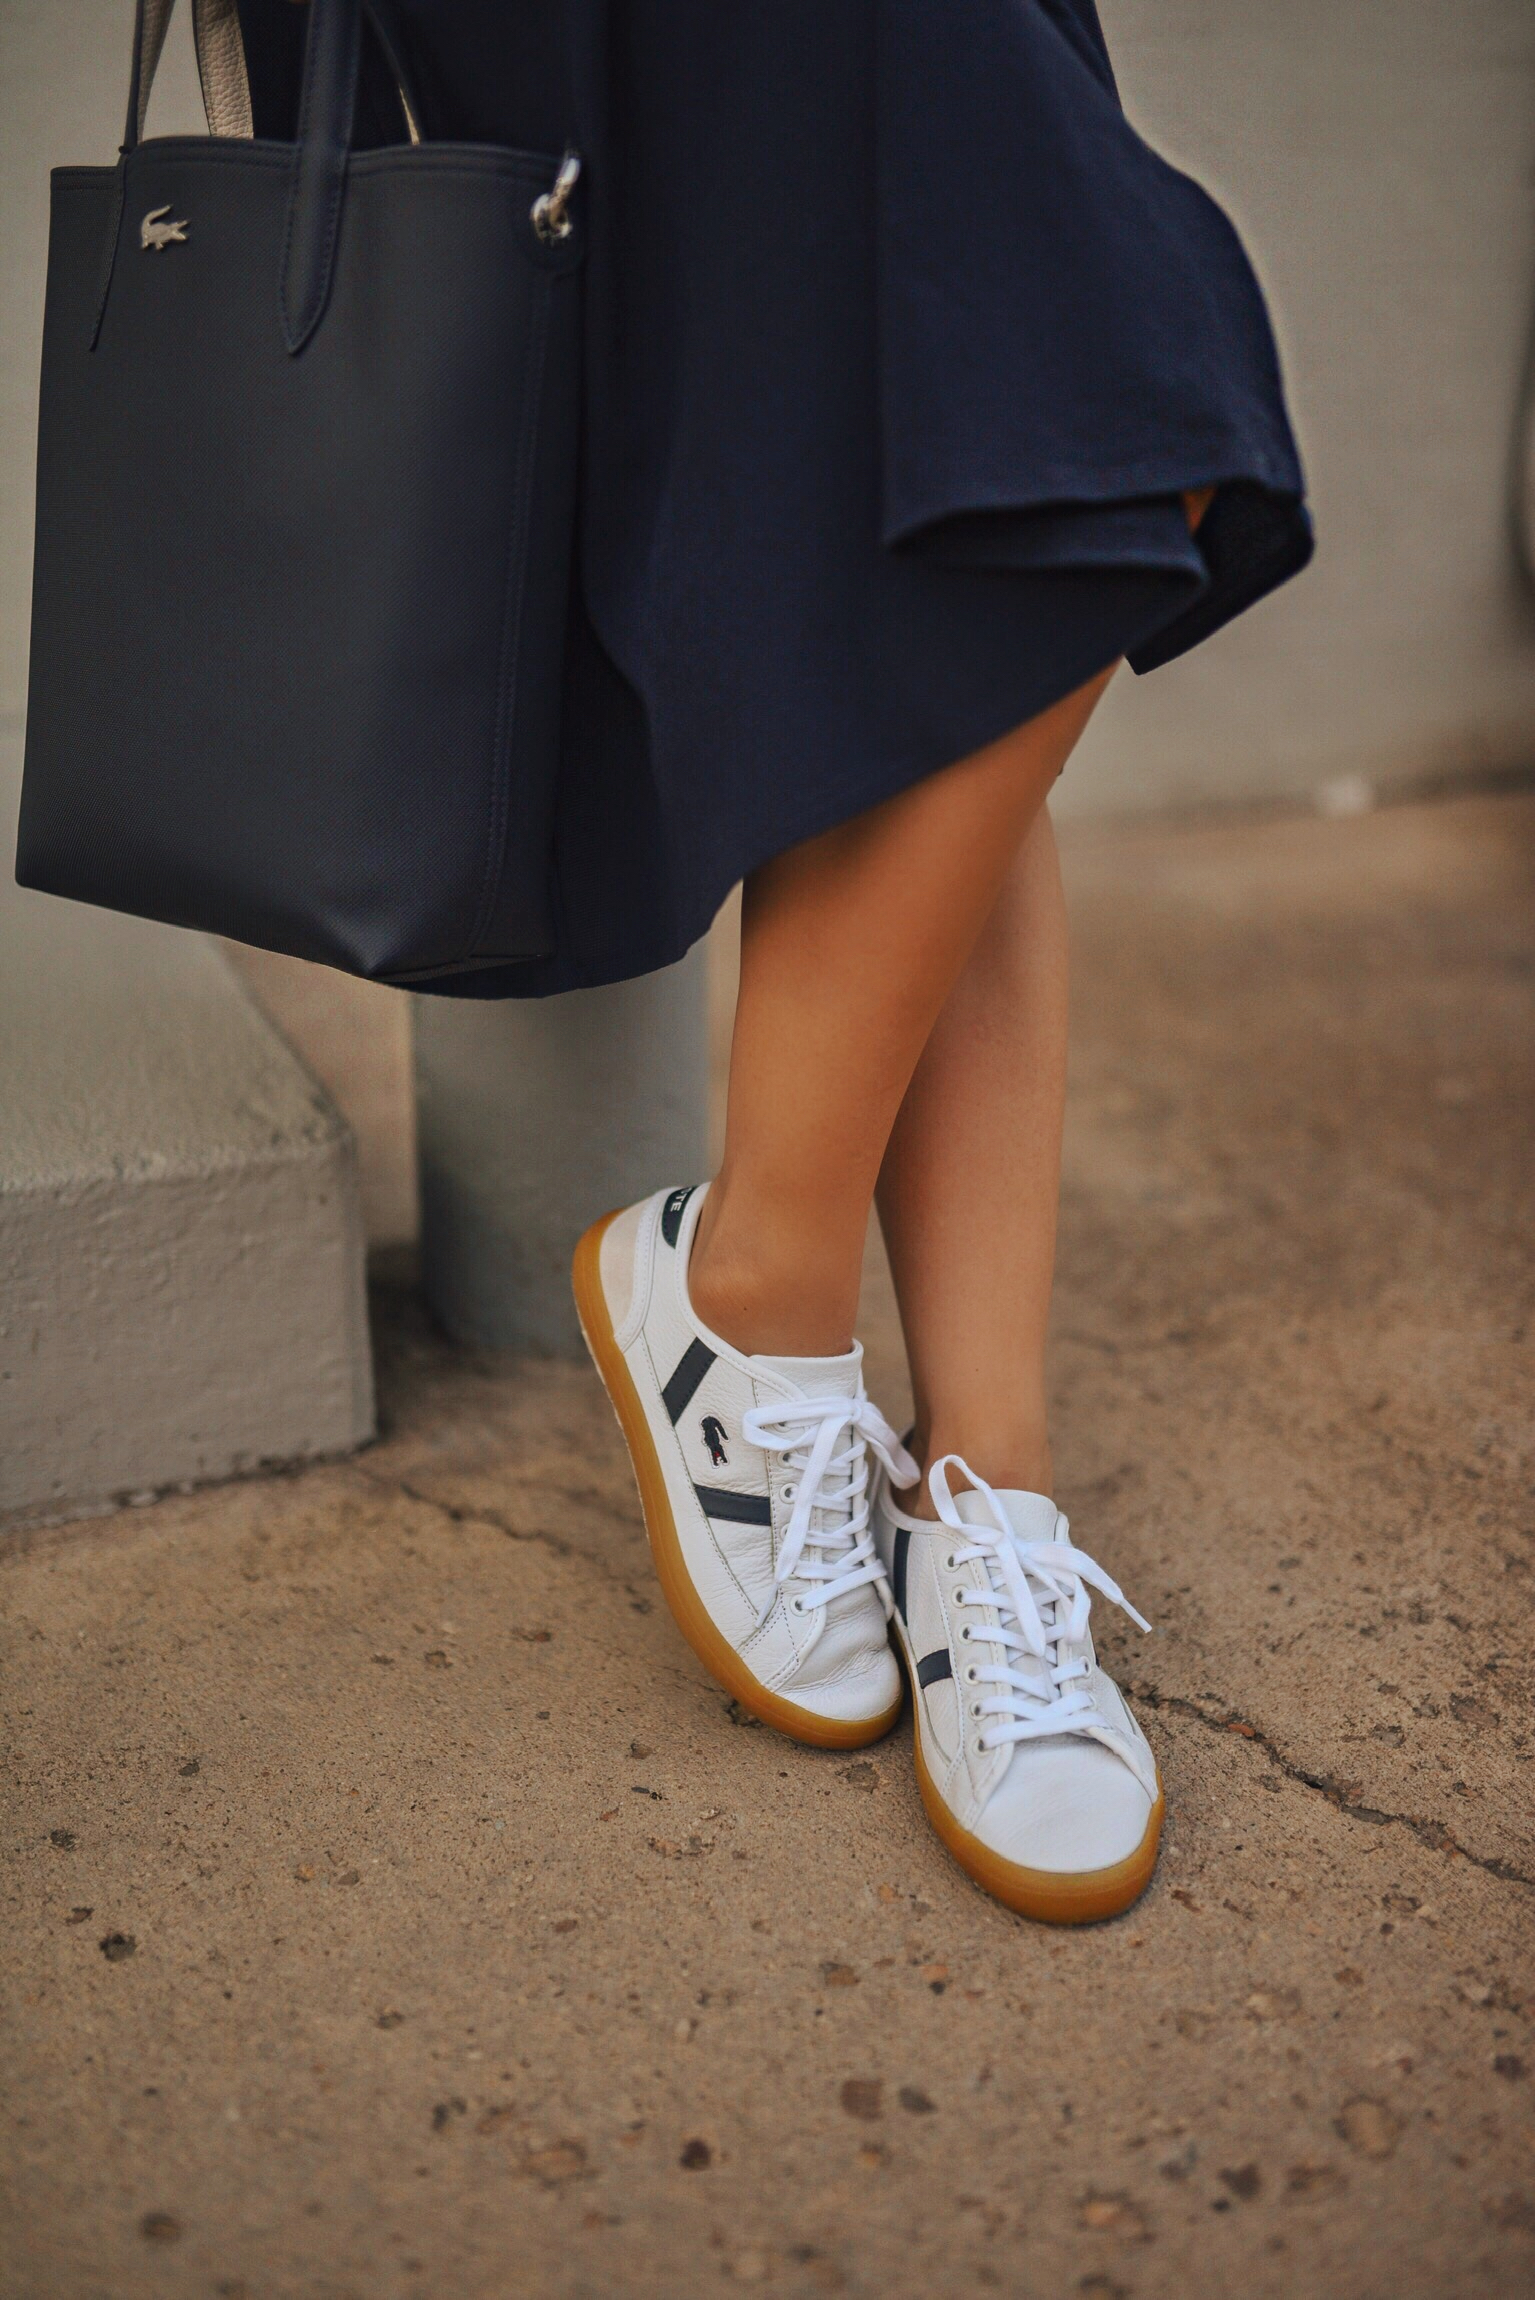 Carolina Hellal of Chic Talk wearing a Lacoste shirtdress, white sneakers and structured bag